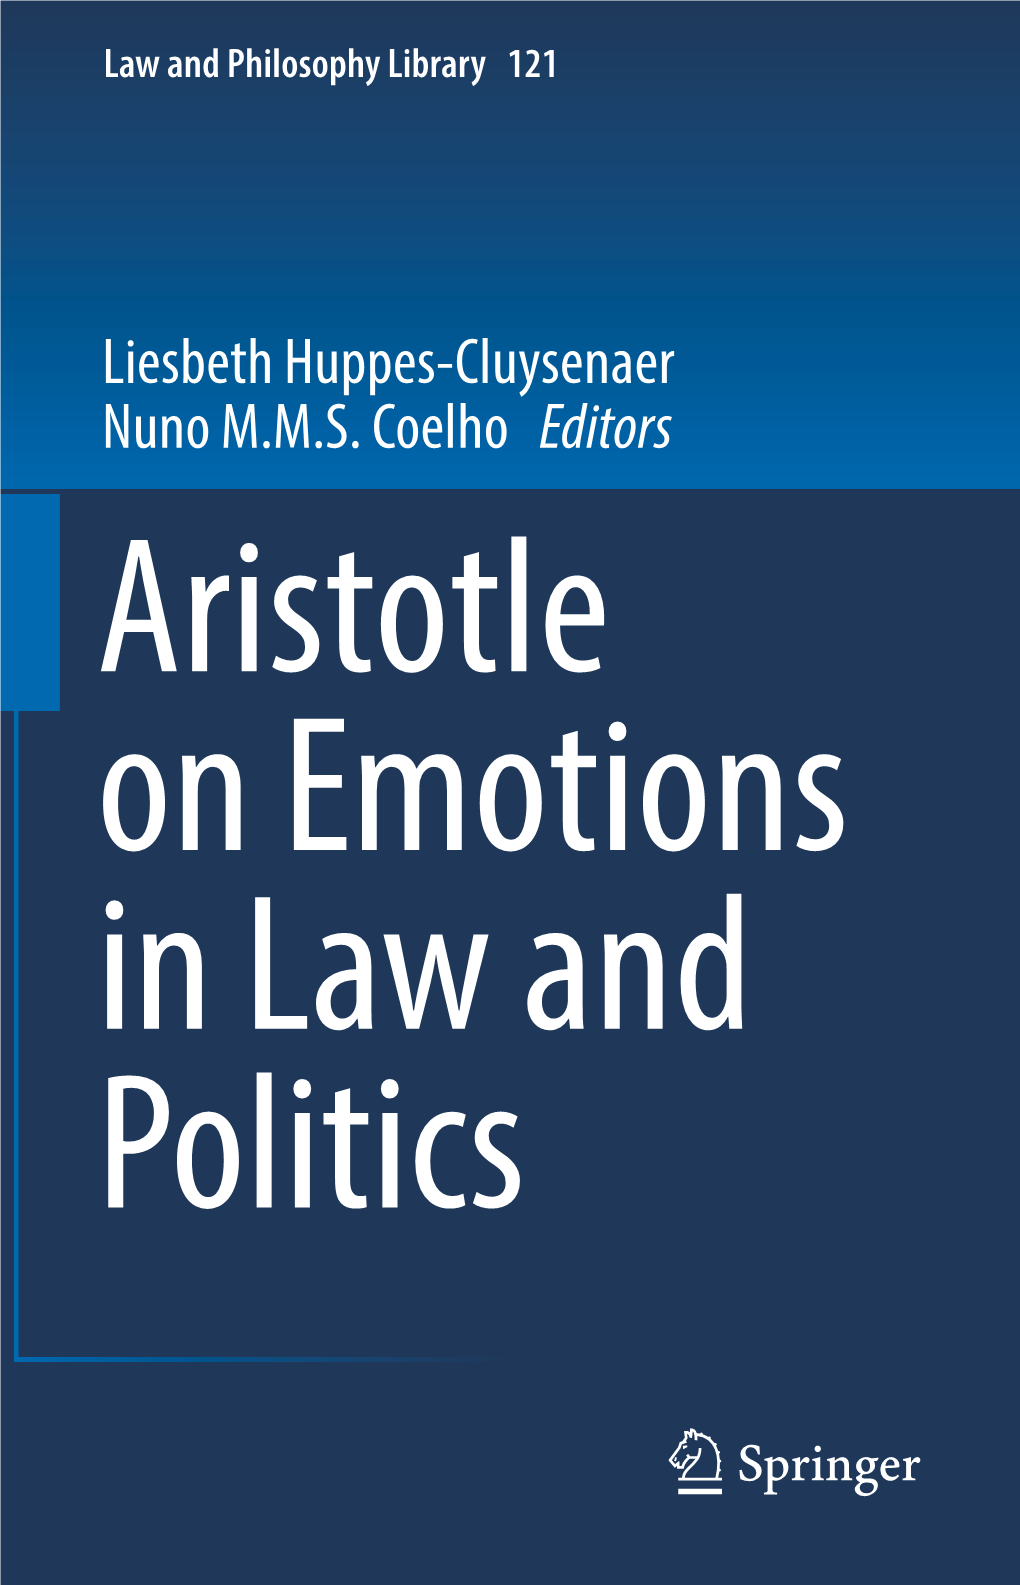 Liesbeth Huppes-Cluysenaer Nuno M.M.S. Coelho Editors Aristotle on Emotions in Law and Politics Law and Philosophy Library